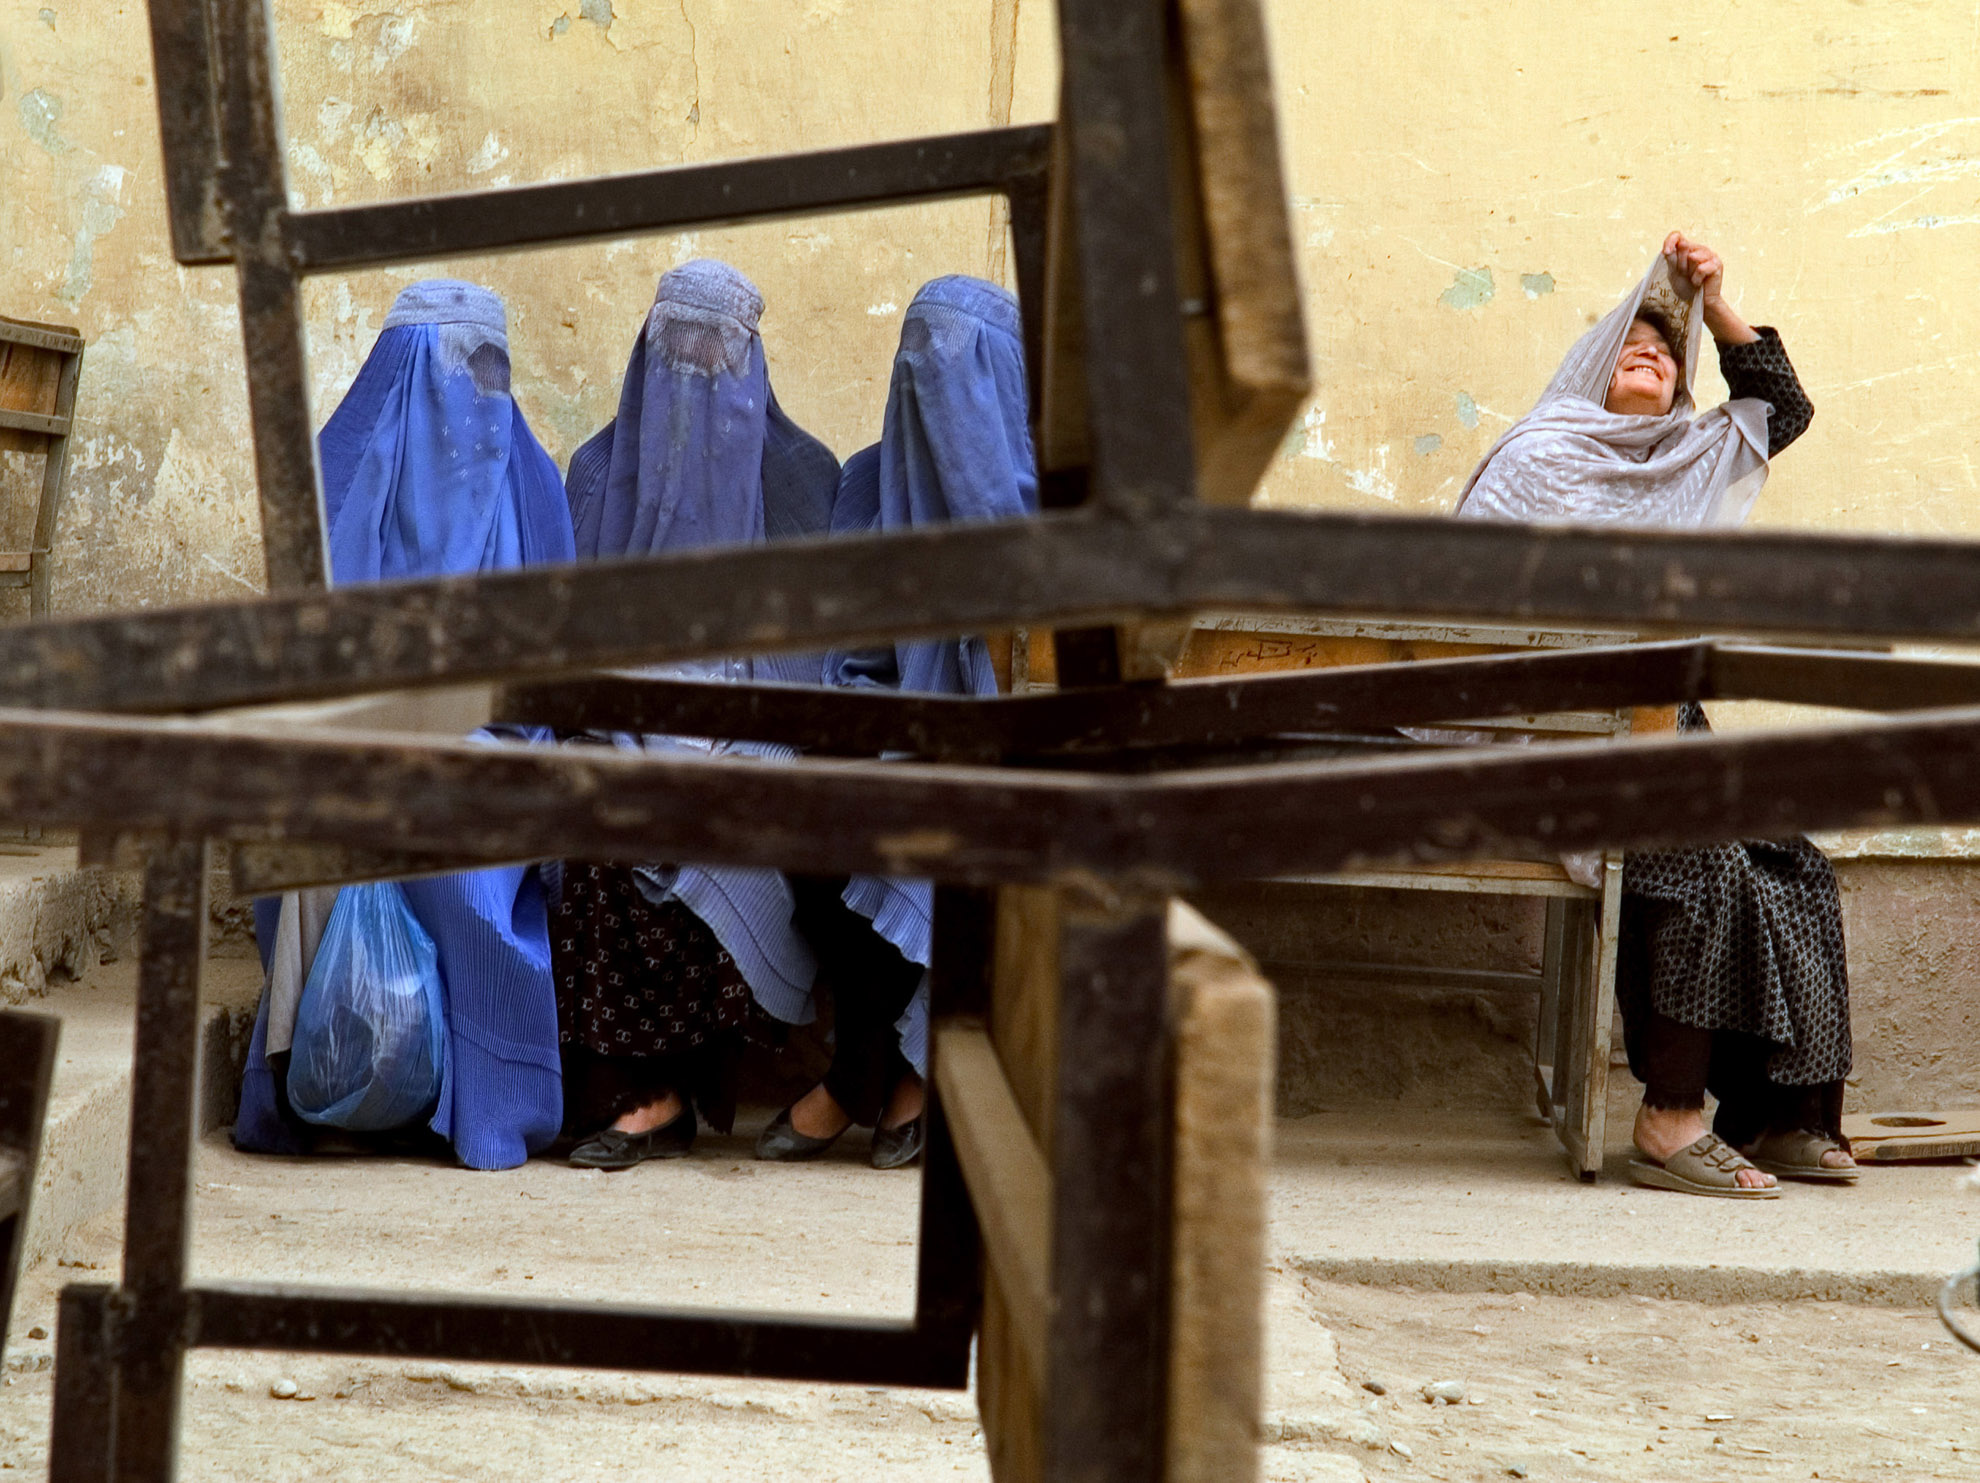 This image was taken on election day in Kabul, October 9, 2004 - the first time women were given the right to vote in a democratic election in Afghanistan. Despite inflated numbers and a fraudulent electoral process, women in Kabul - at least some of them - voted of their own free will. In rural regions, it was more likely the case that women (most of whom are illiterate) voted for whomever their husbands, fathers and brothers told them to vote for.This image was taken just after four women voted at a high school in Kabul.